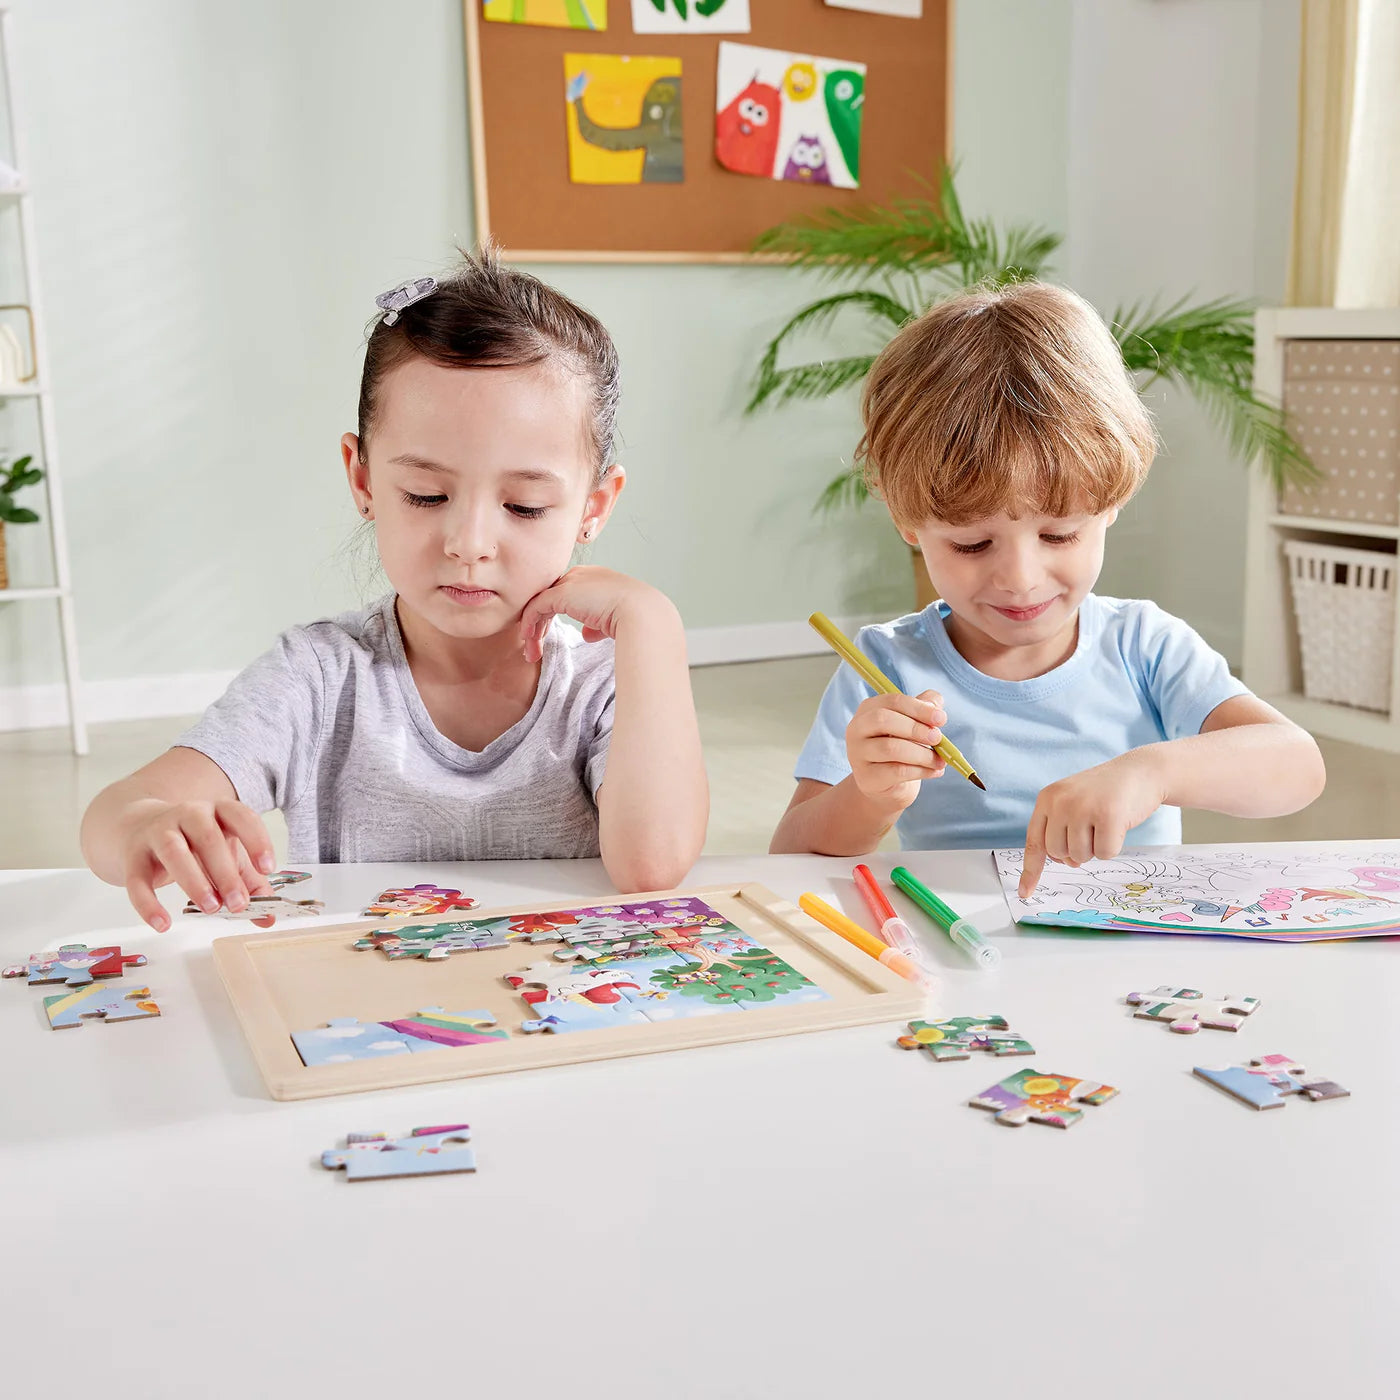 Hape Double Sided Colour Puzzle Unicorn & Friends | 24 Piece available at Bear & Moo